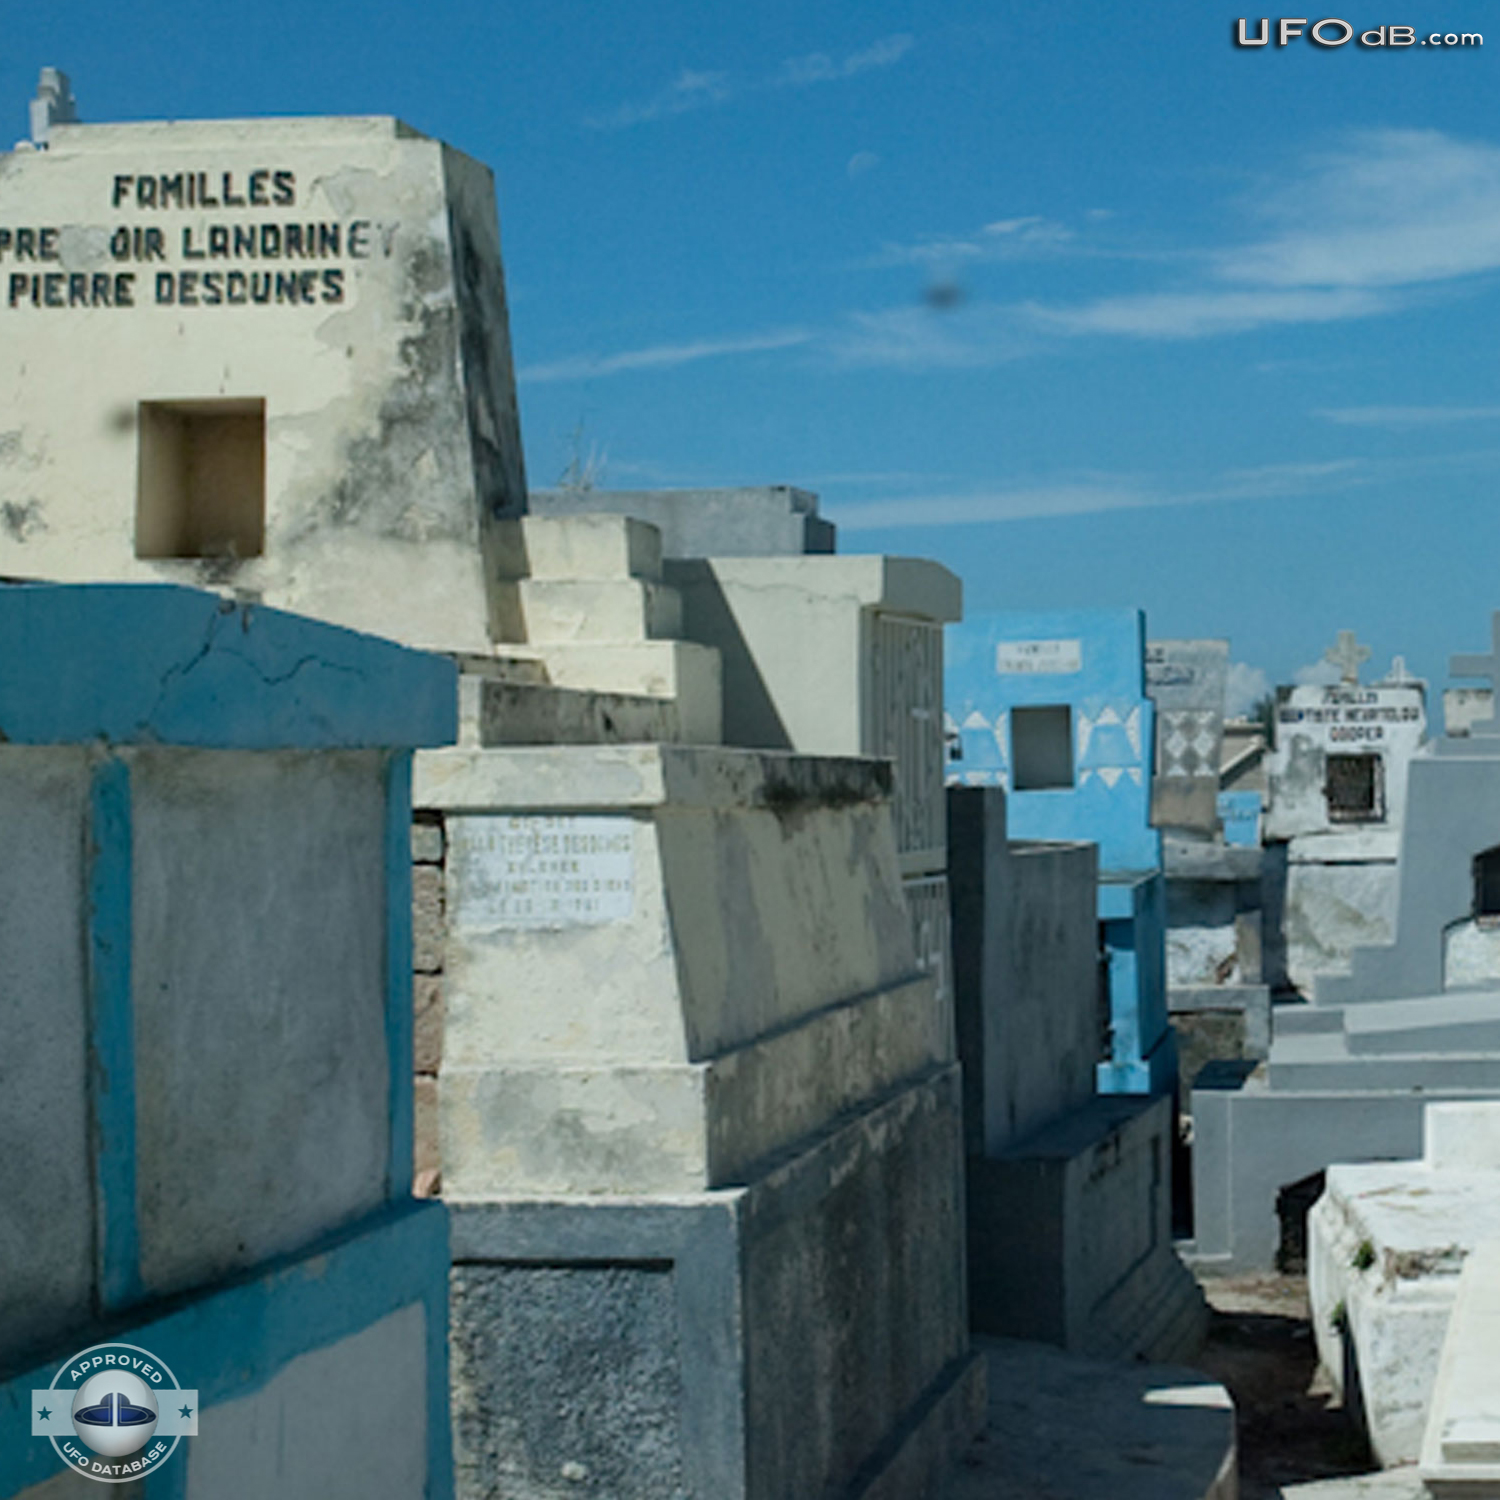 Port-au-Prince, Haiti UFO picture taken in a cemetery after earthquake UFO Picture #347-1